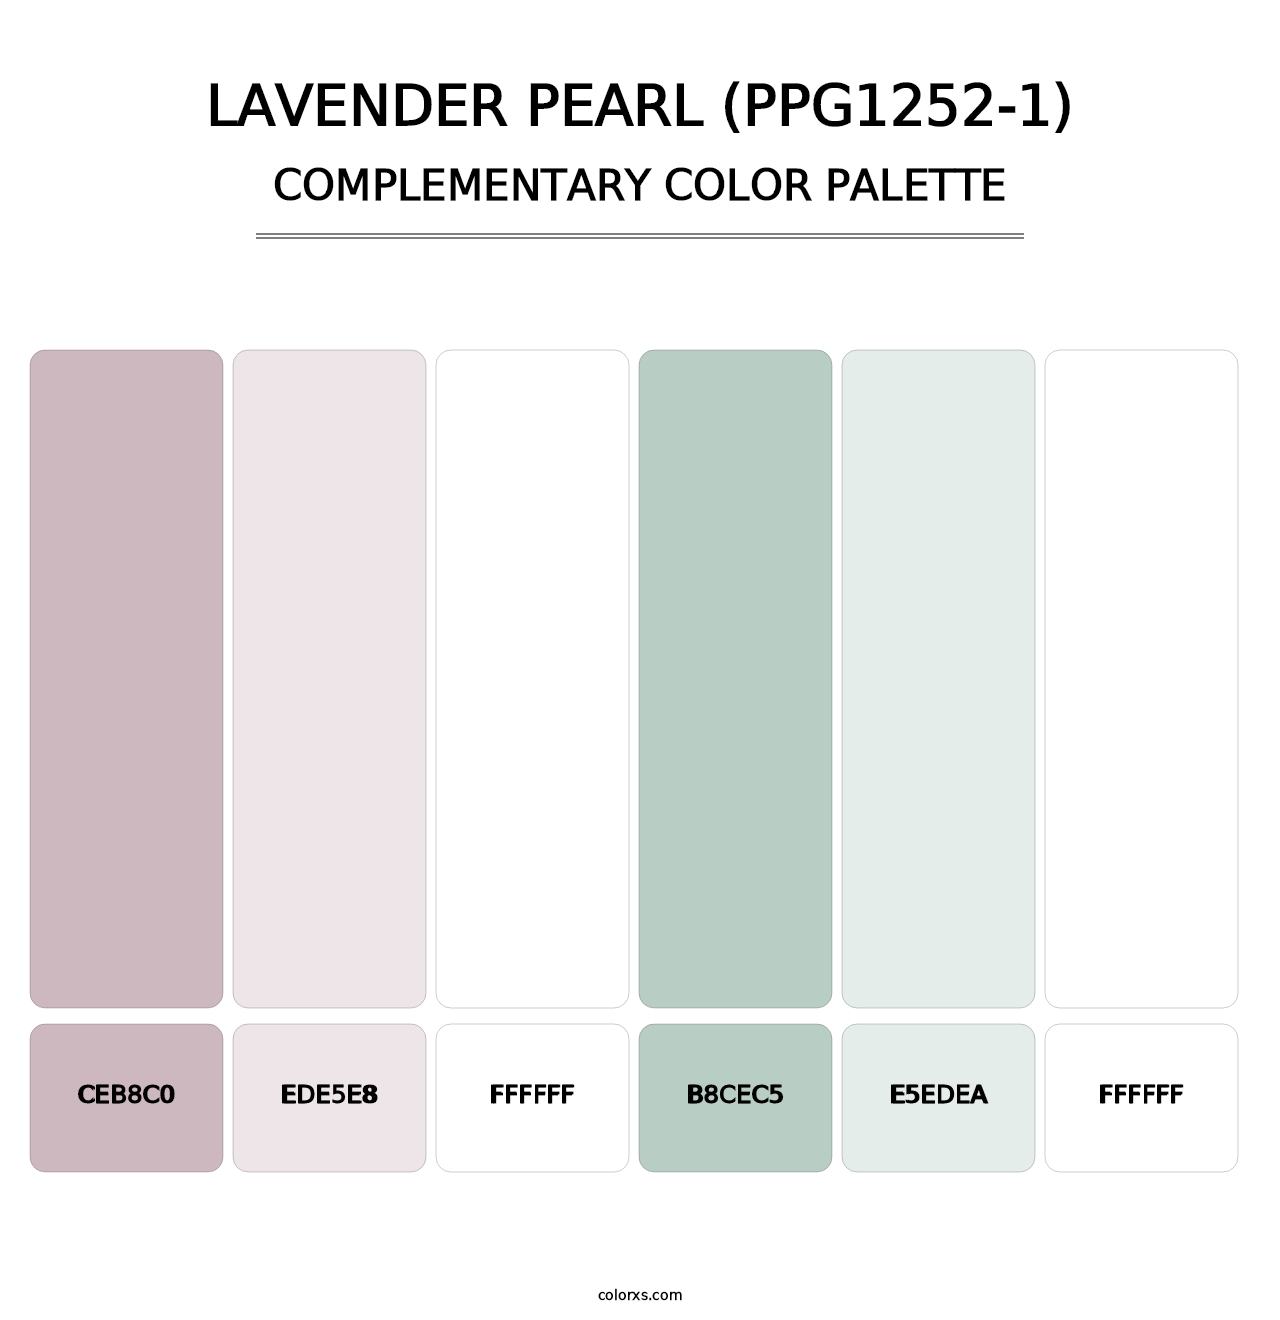 Lavender Pearl (PPG1252-1) - Complementary Color Palette